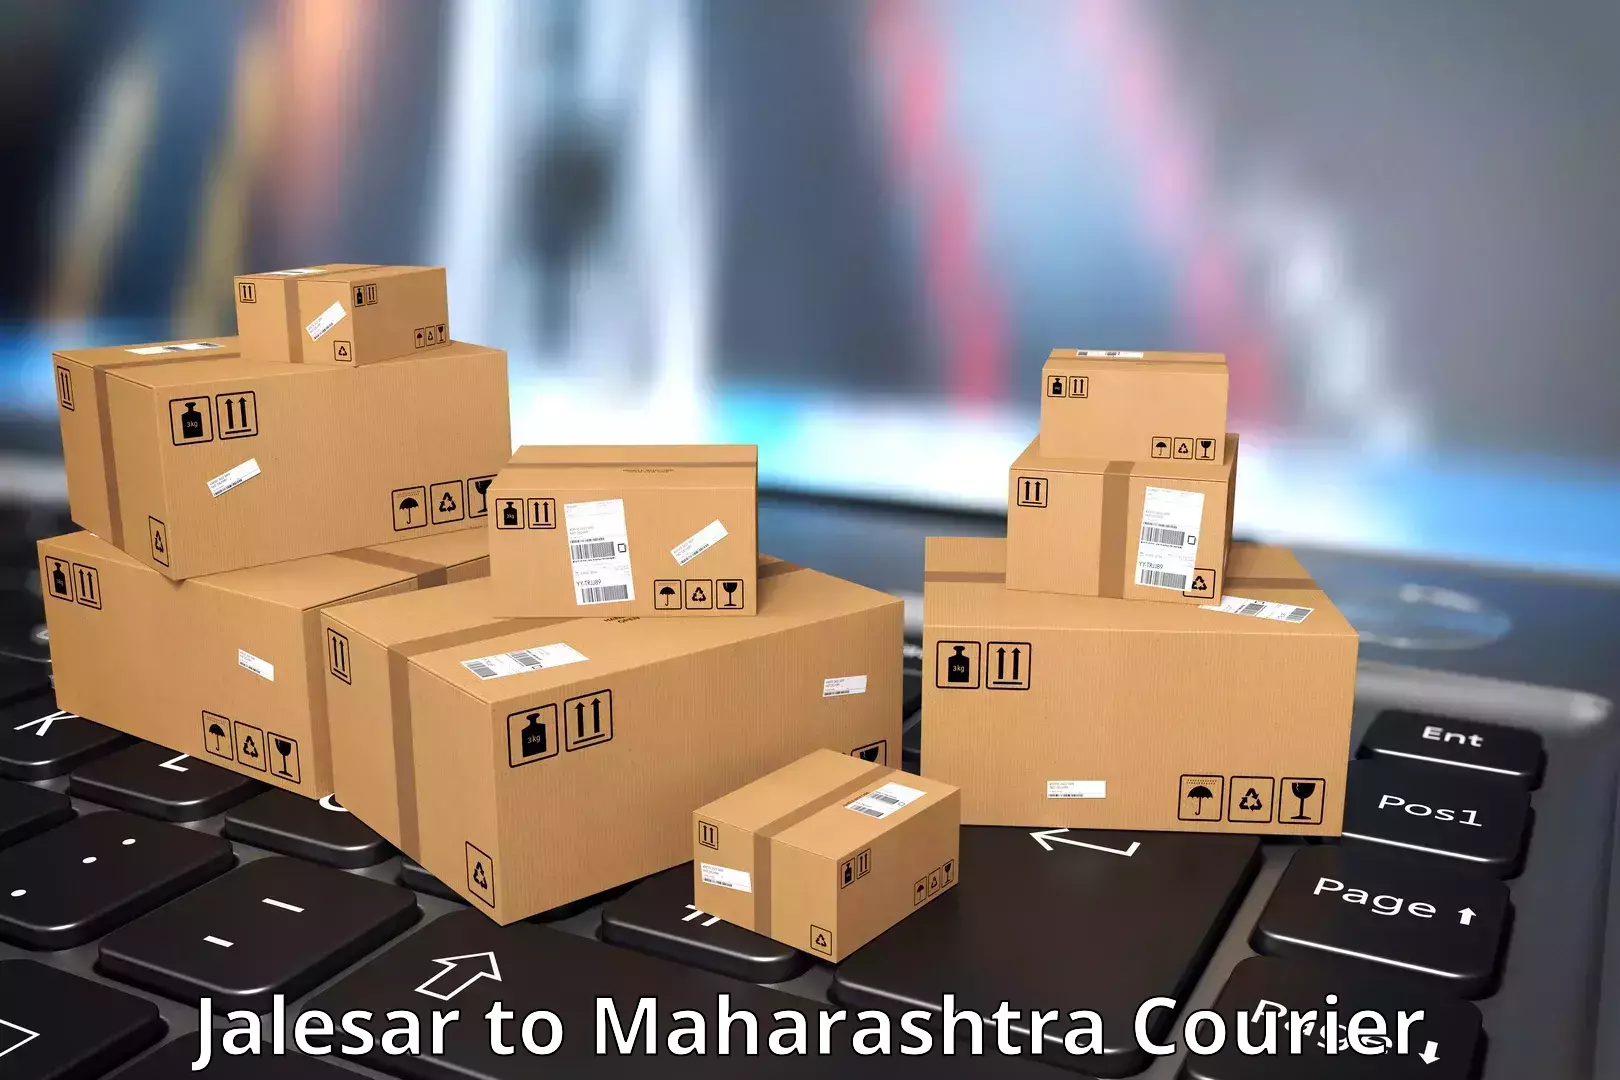 End-to-end delivery Jalesar to Mumbai Port